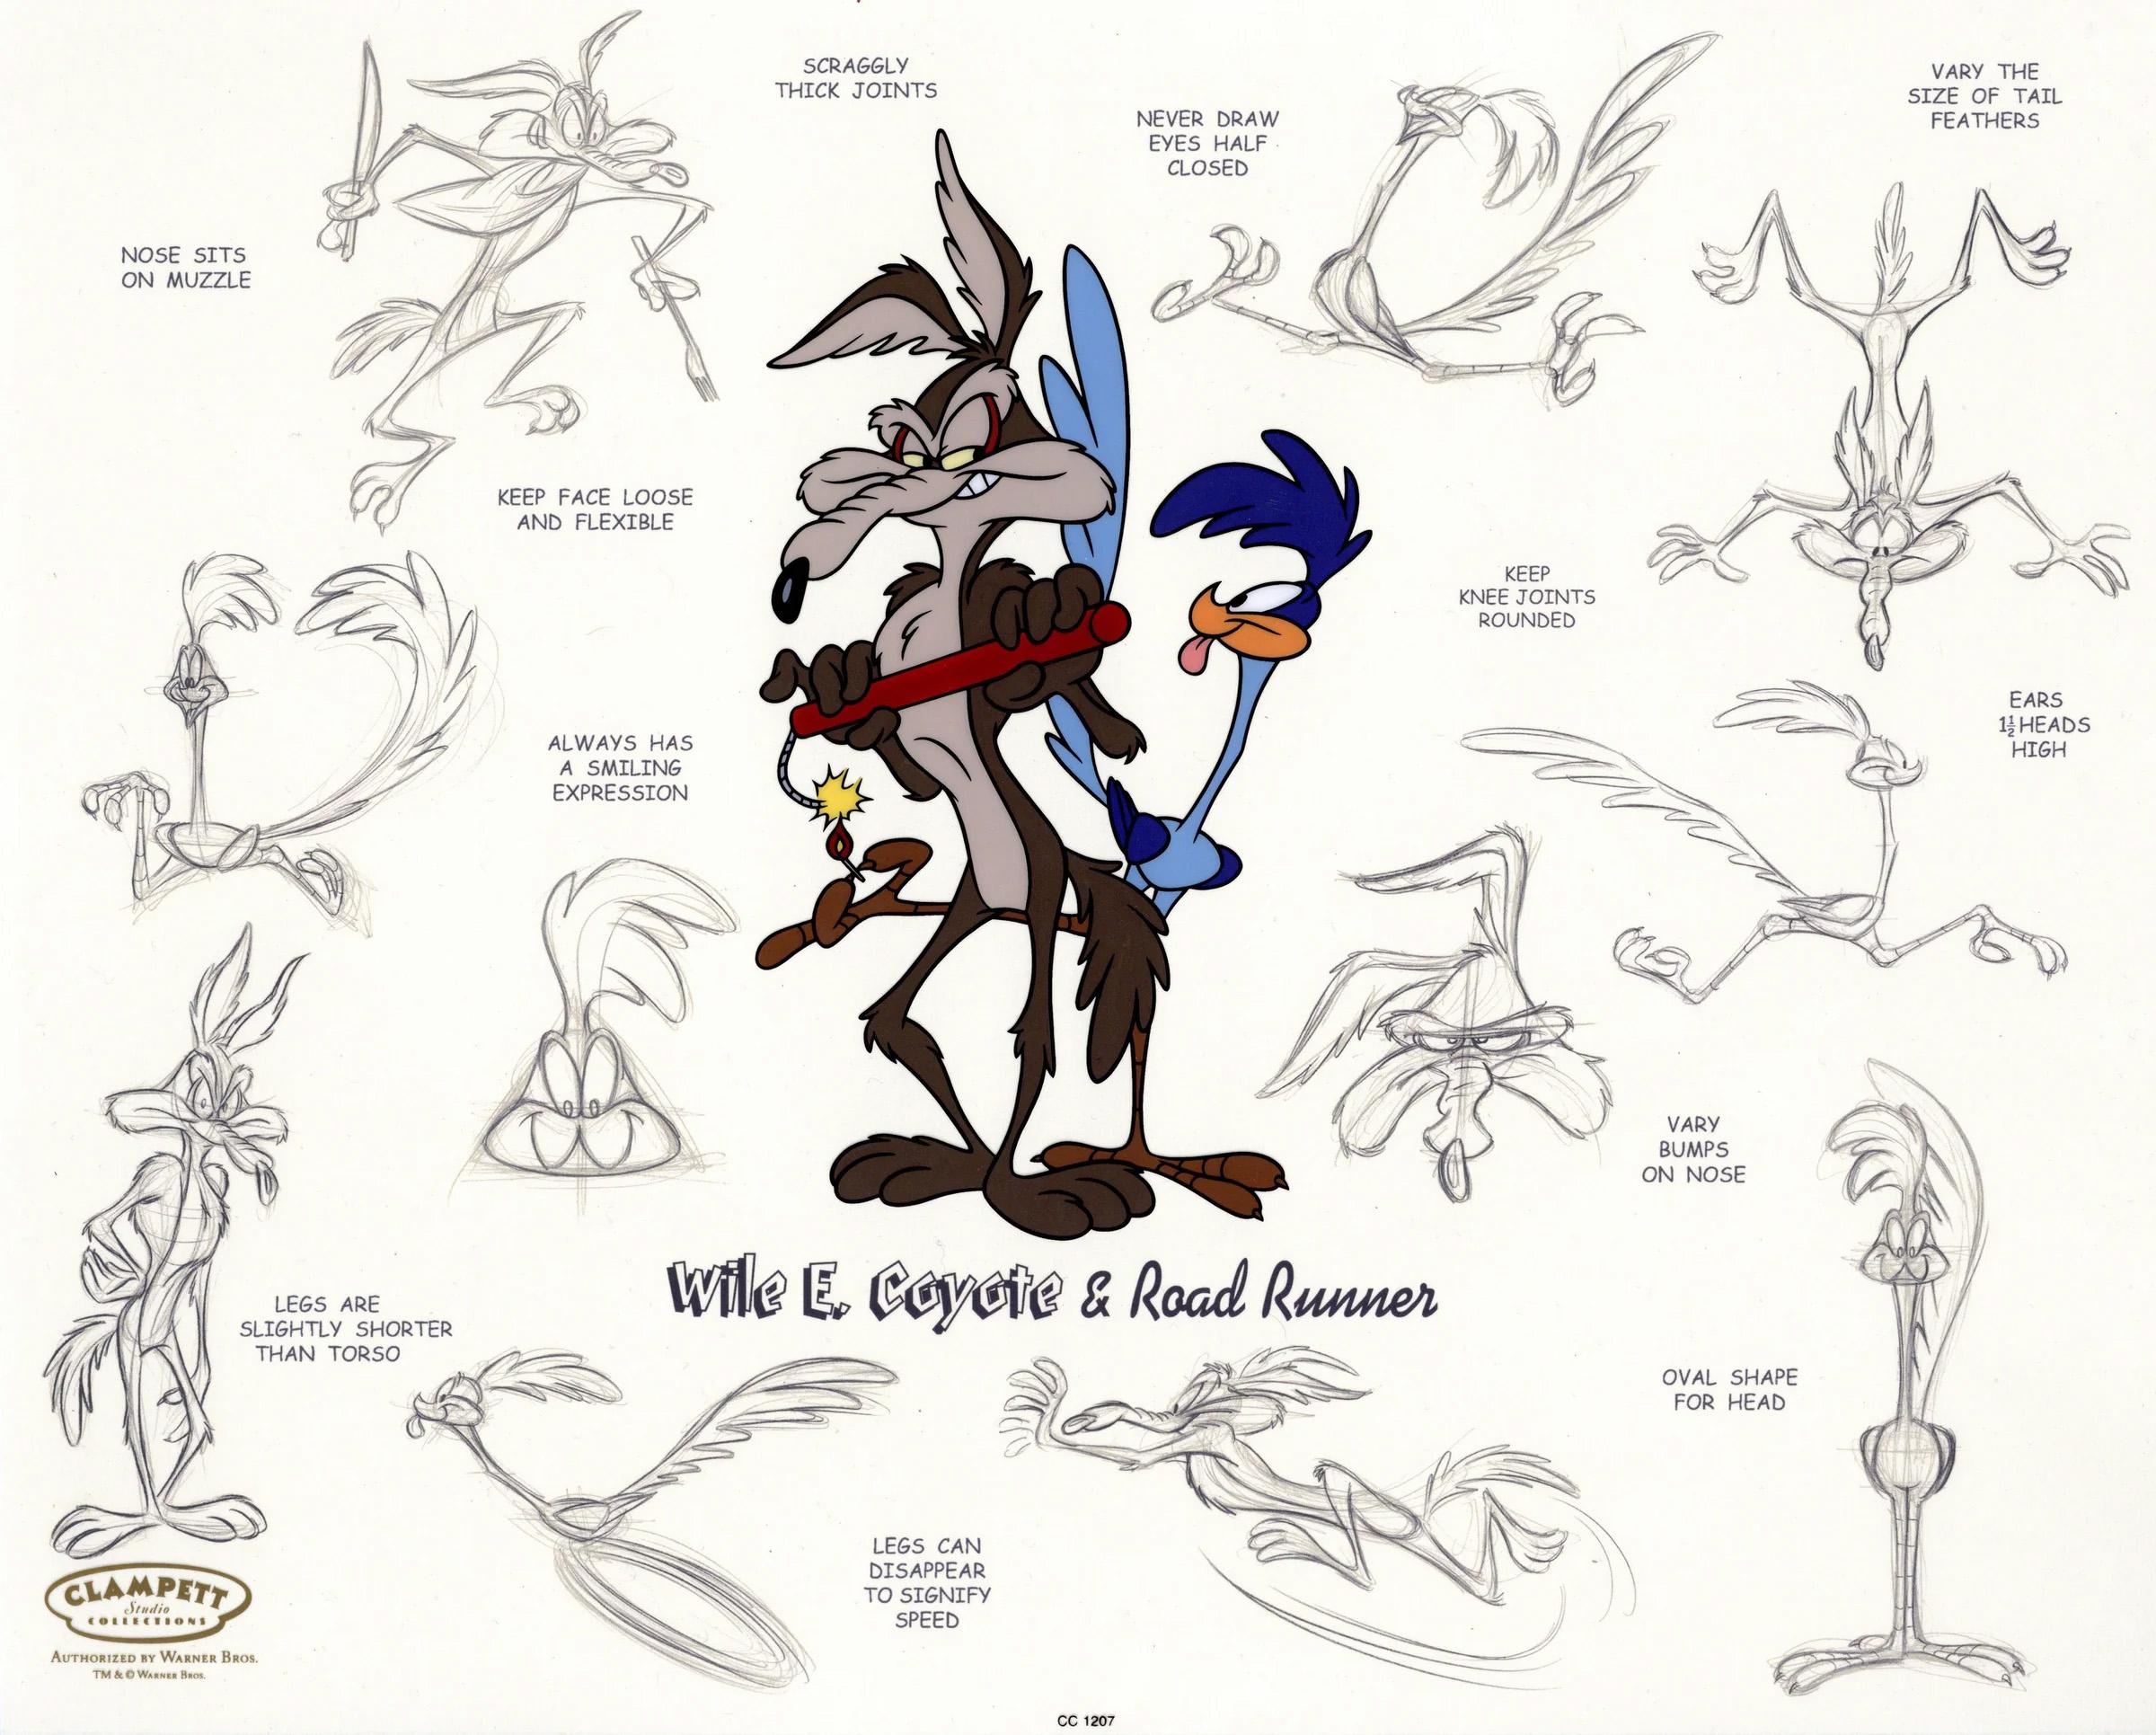 Wile E. Coyote and Road Runner Model Sheet - Art by Looney Tunes Studio Artists